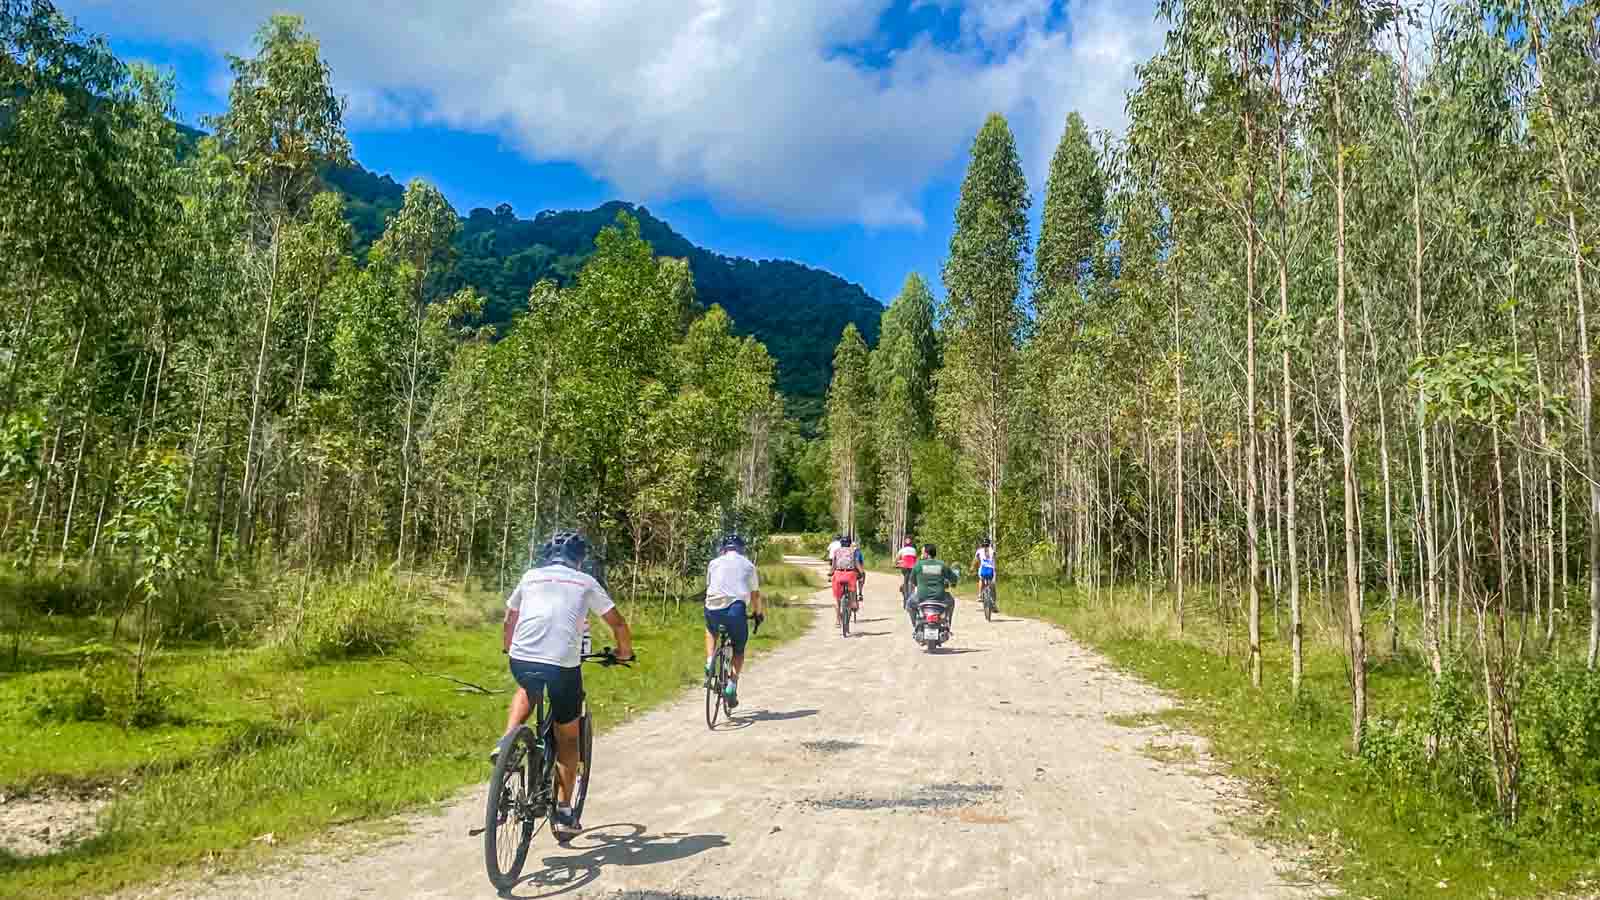 Cycling tour group riding into Sririnat National Park in Thailand